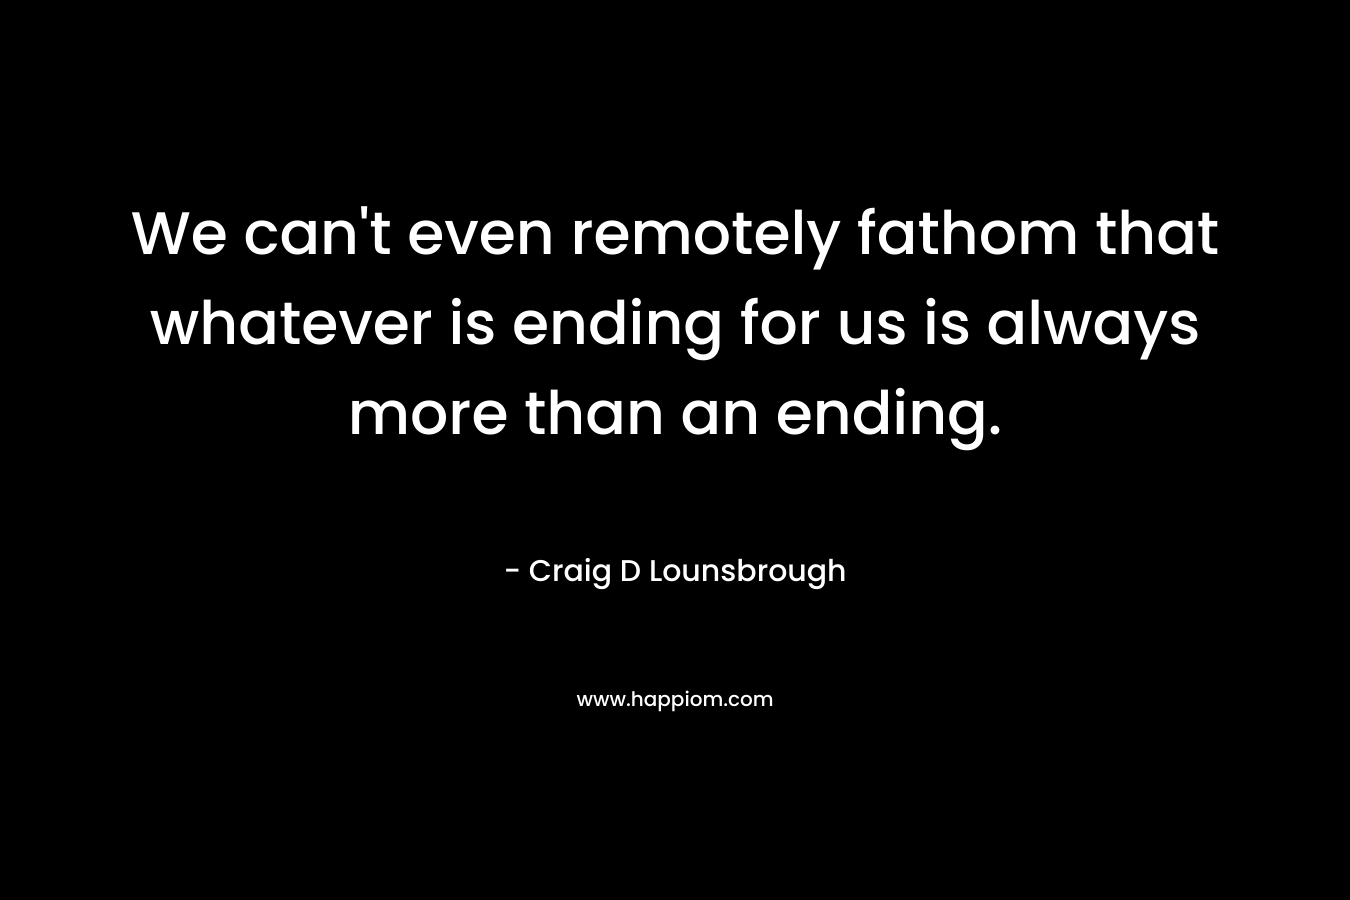 We can’t even remotely fathom that whatever is ending for us is always more than an ending. – Craig D Lounsbrough